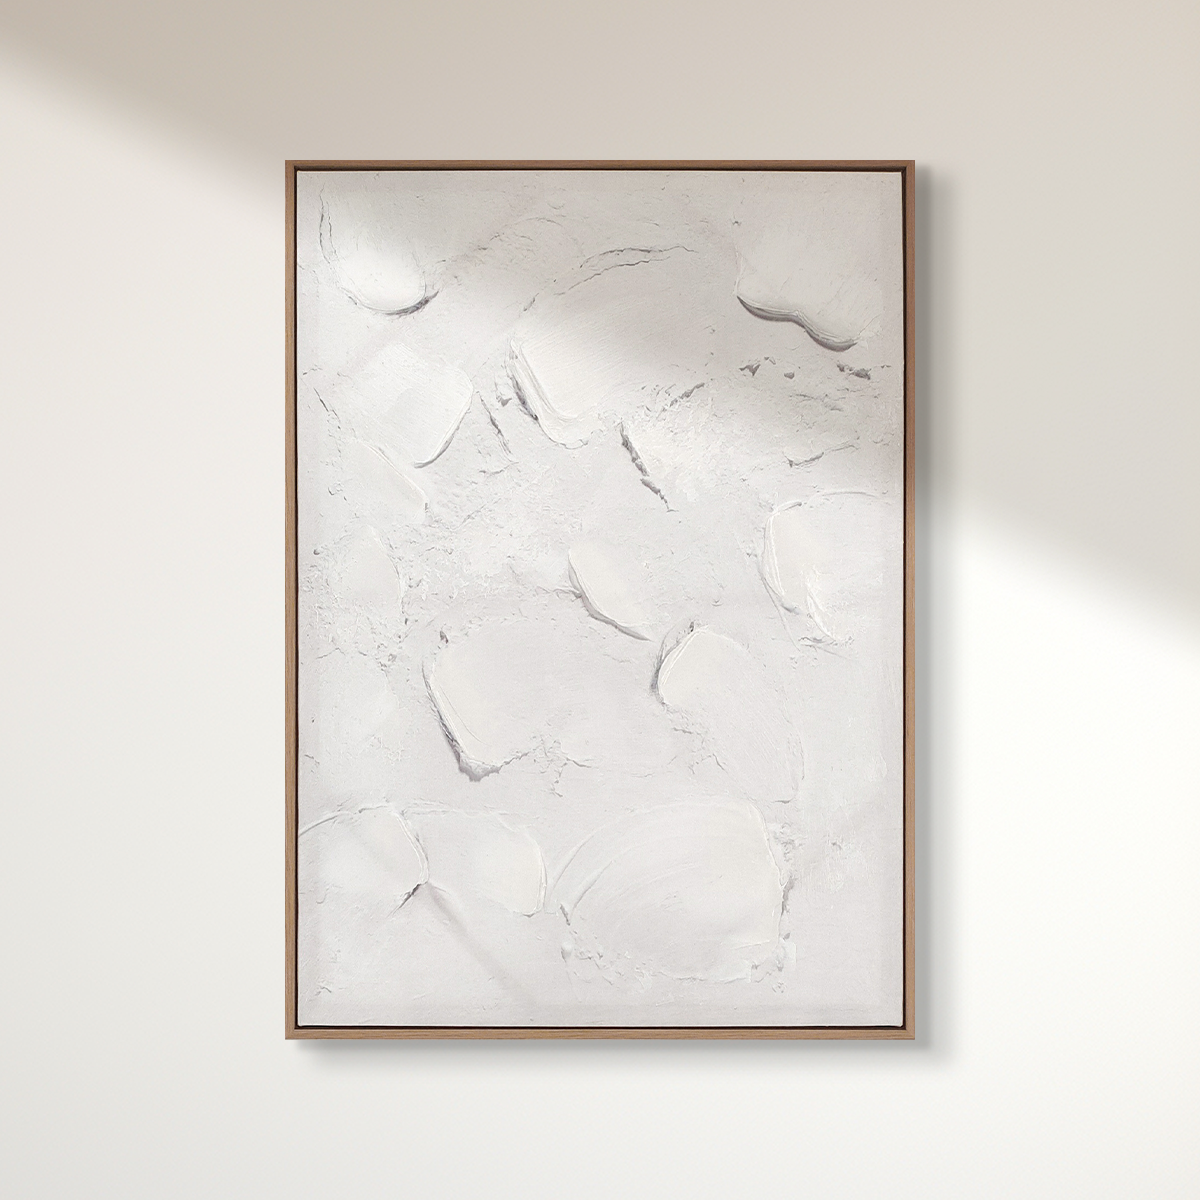 Abstract textured wall art affordable oil painting unframed white portrait on wooden frame